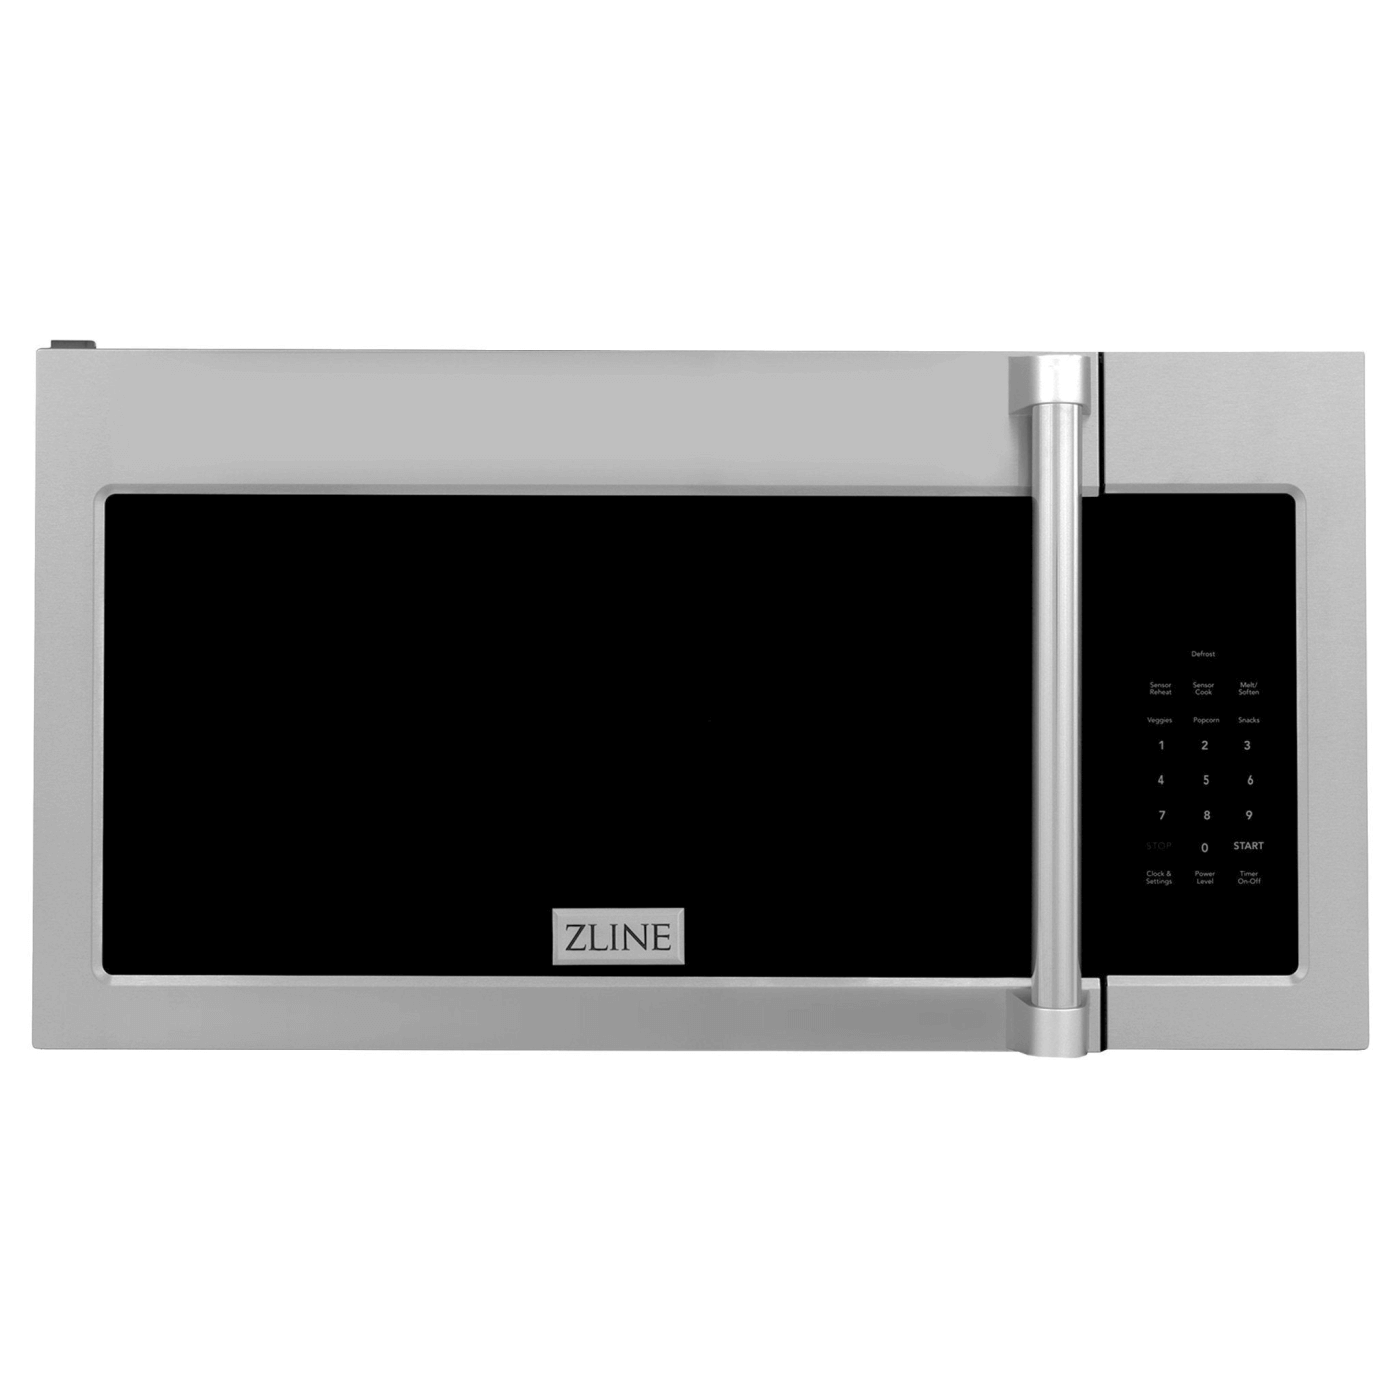 ZLINE Over-the-Range Convection Microwave Oven